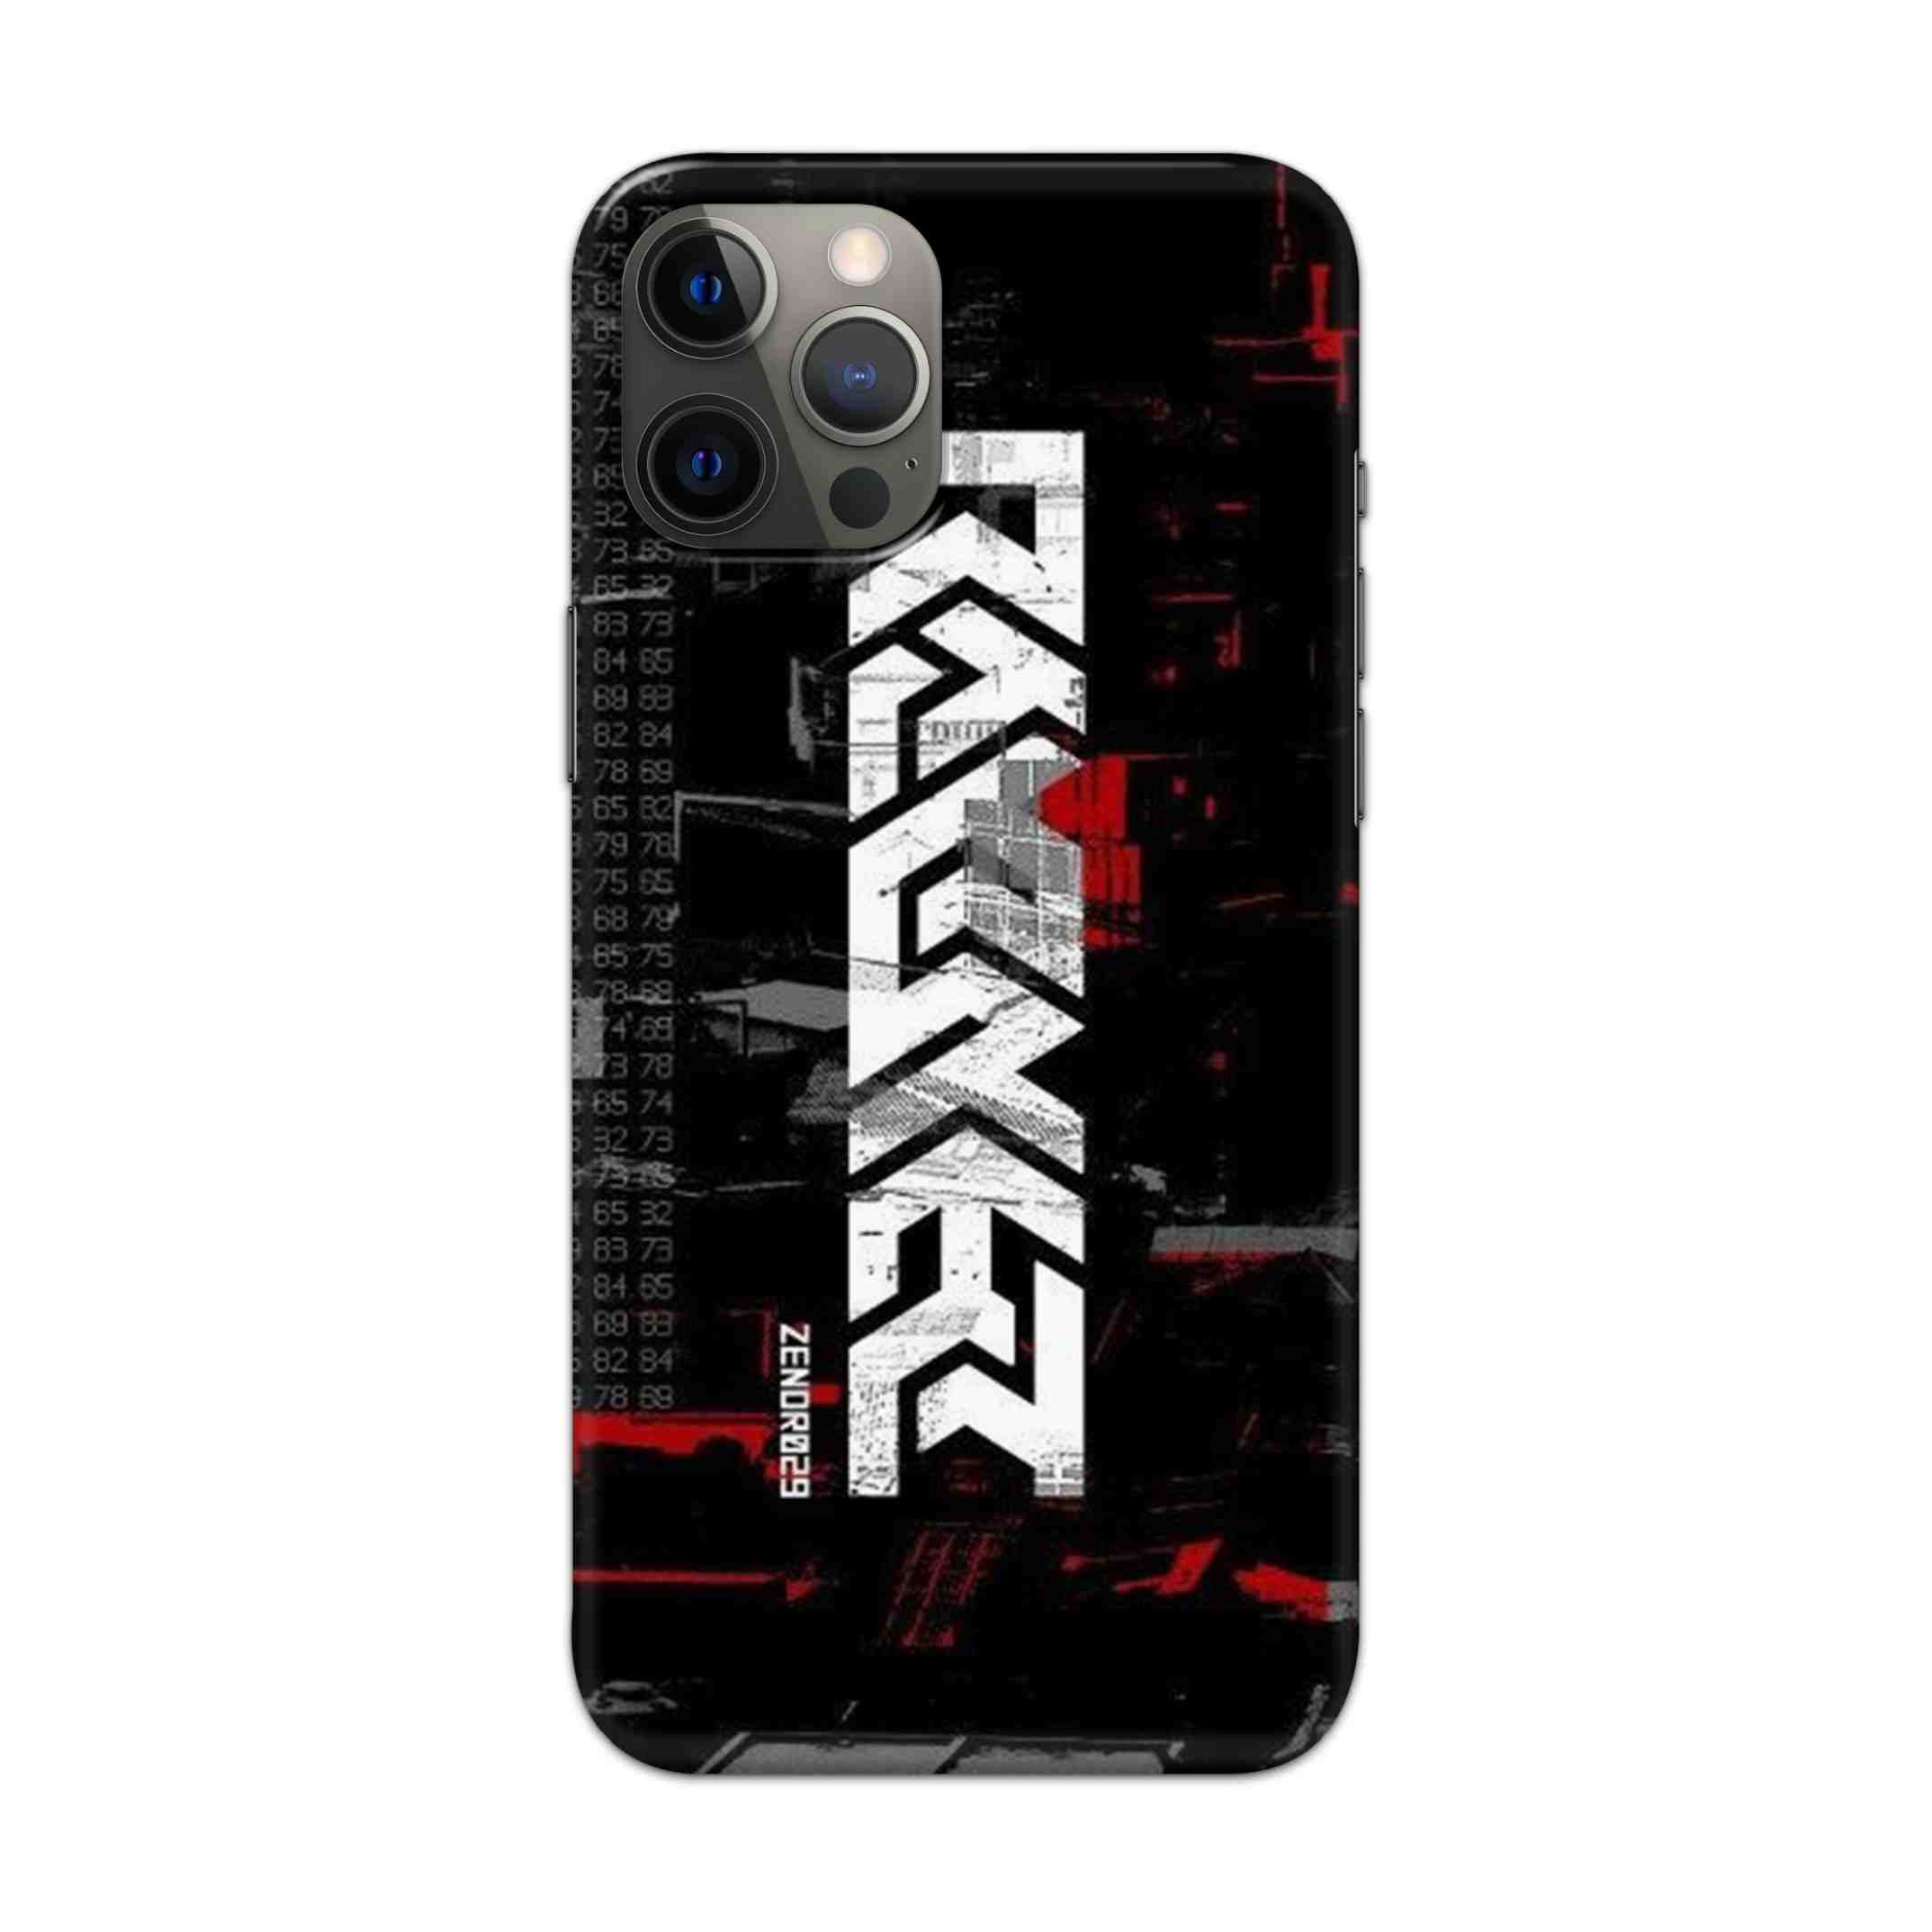 Buy Raxer Hard Back Mobile Phone Case/Cover For Apple iPhone 12 pro max Online